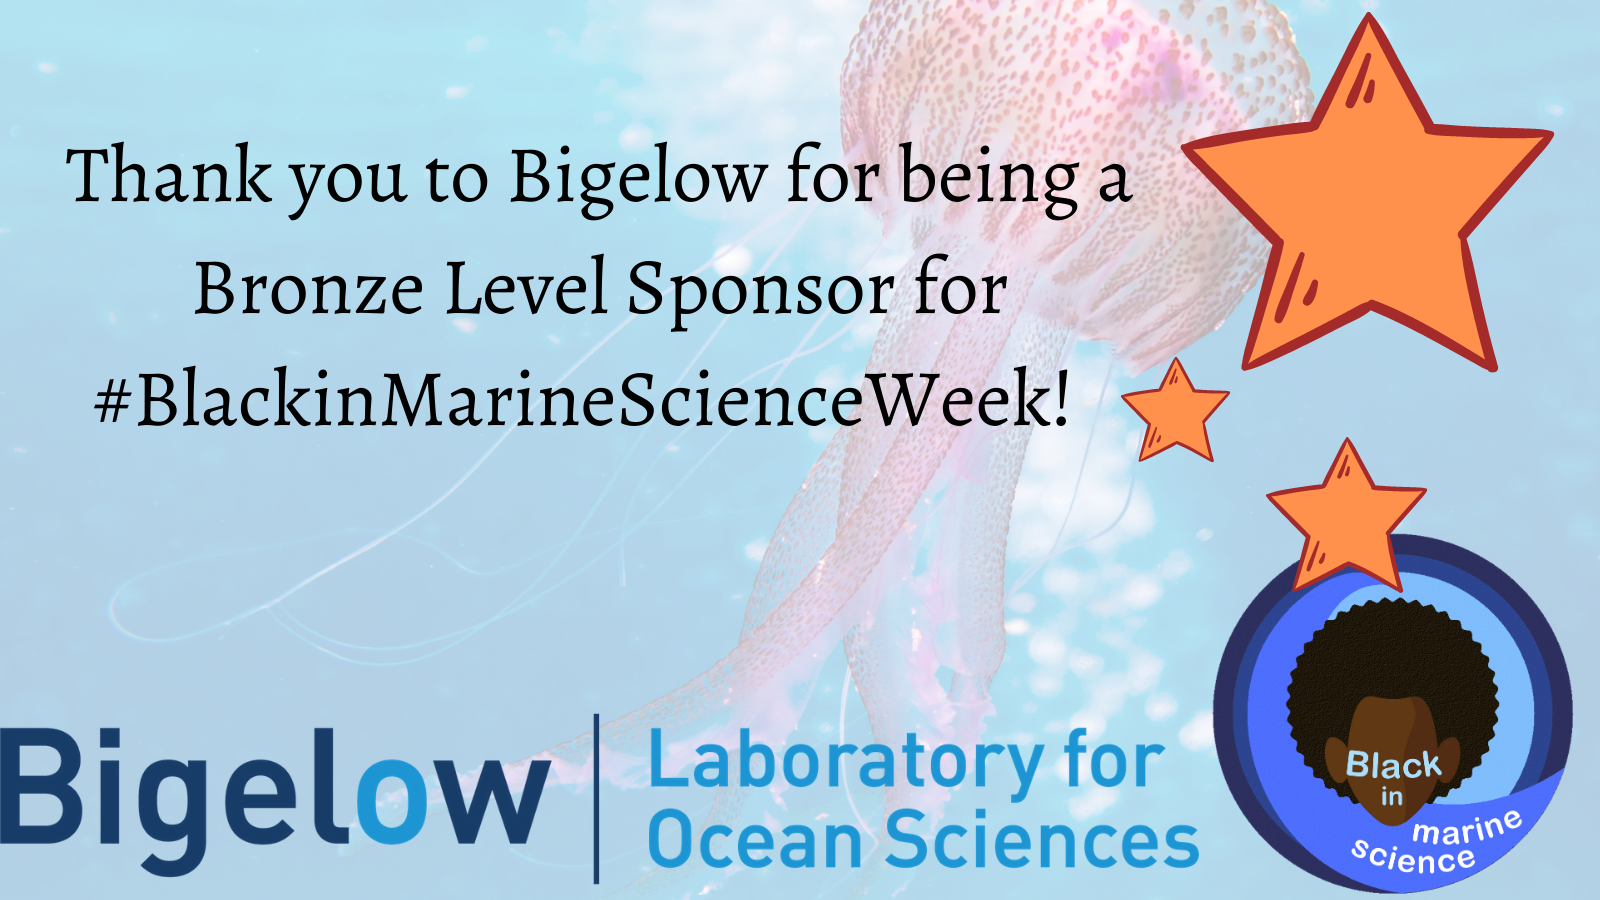 Thank you to the Bigelow Laboratory for Ocean Sciences for being a Bronze Level Sponsor for Black in Marine Science Week